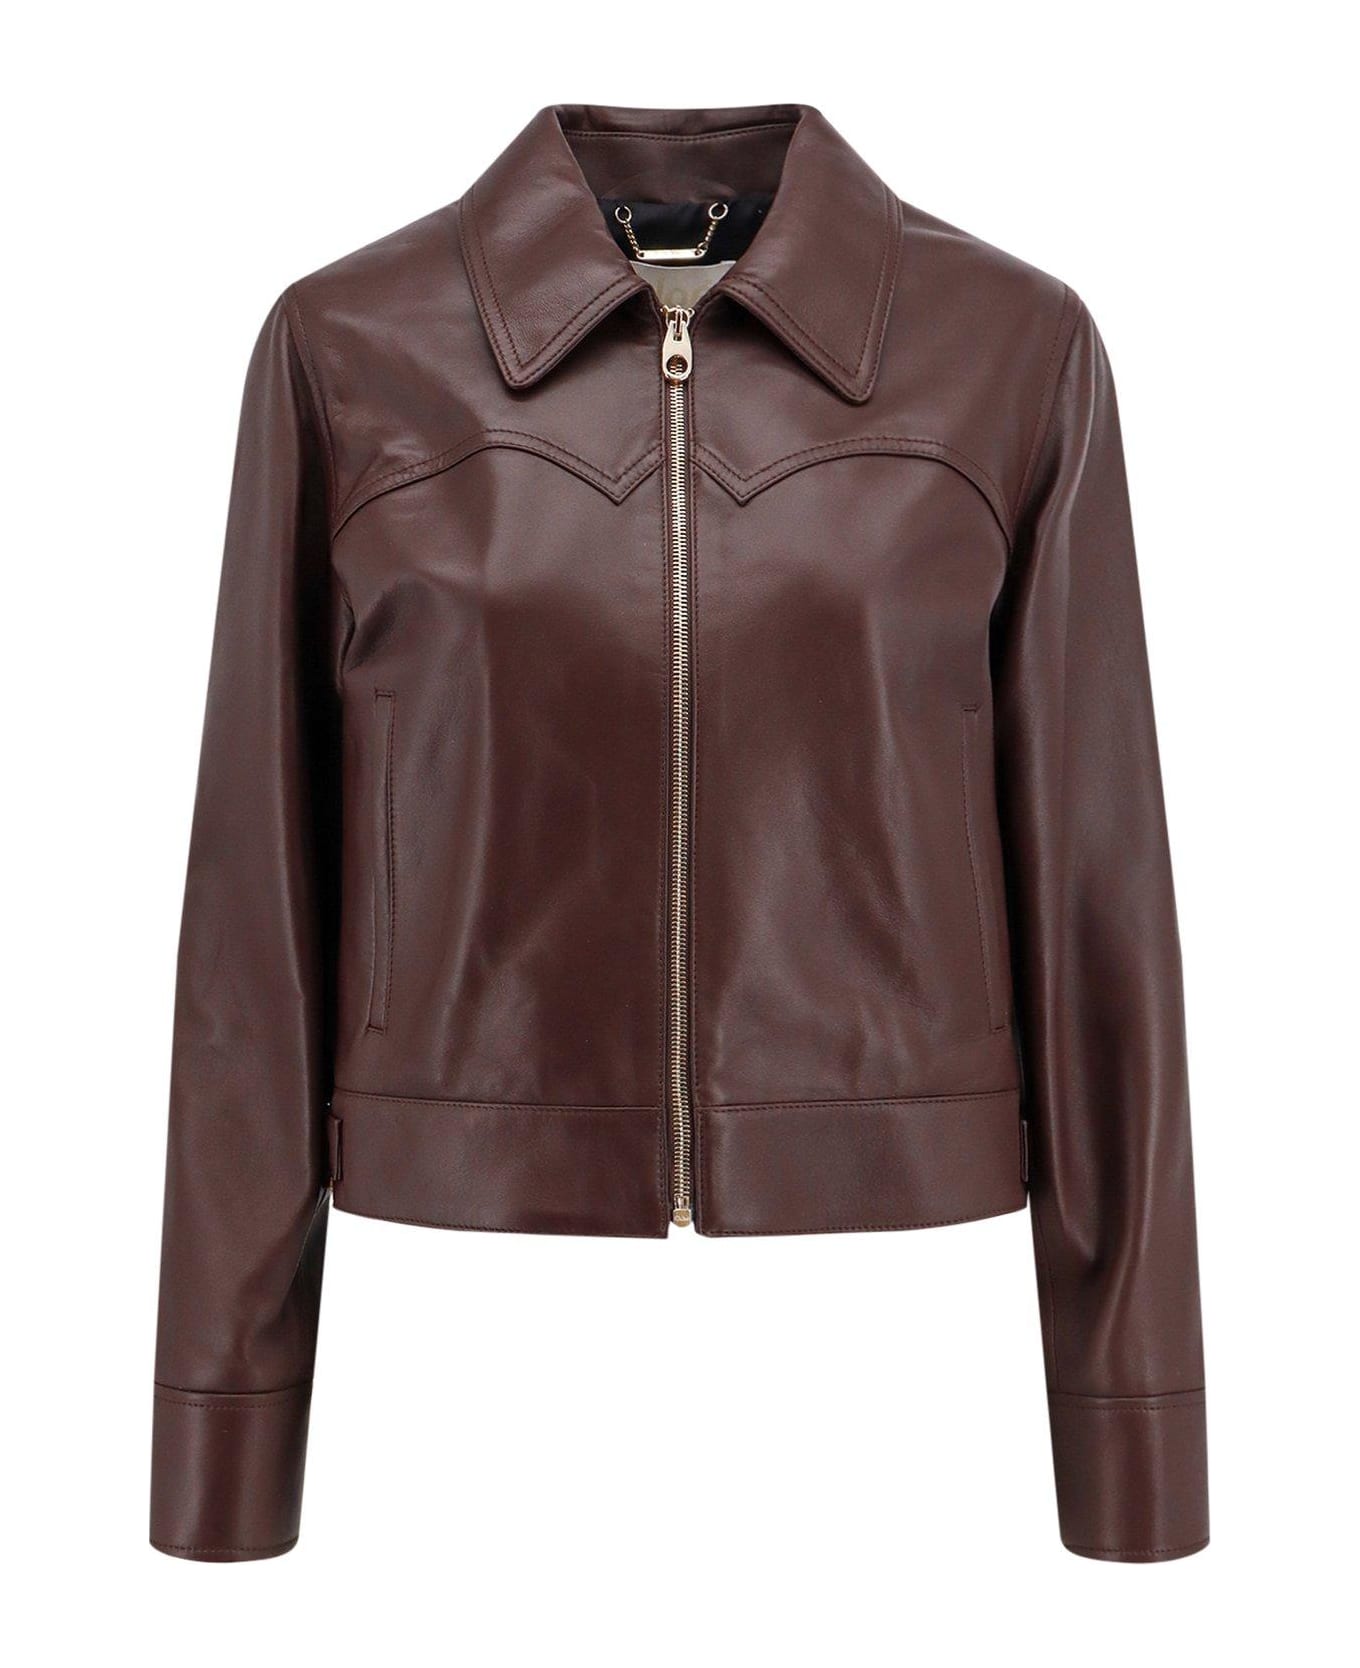 Chloé Zip-up Leather Jacket - Brown